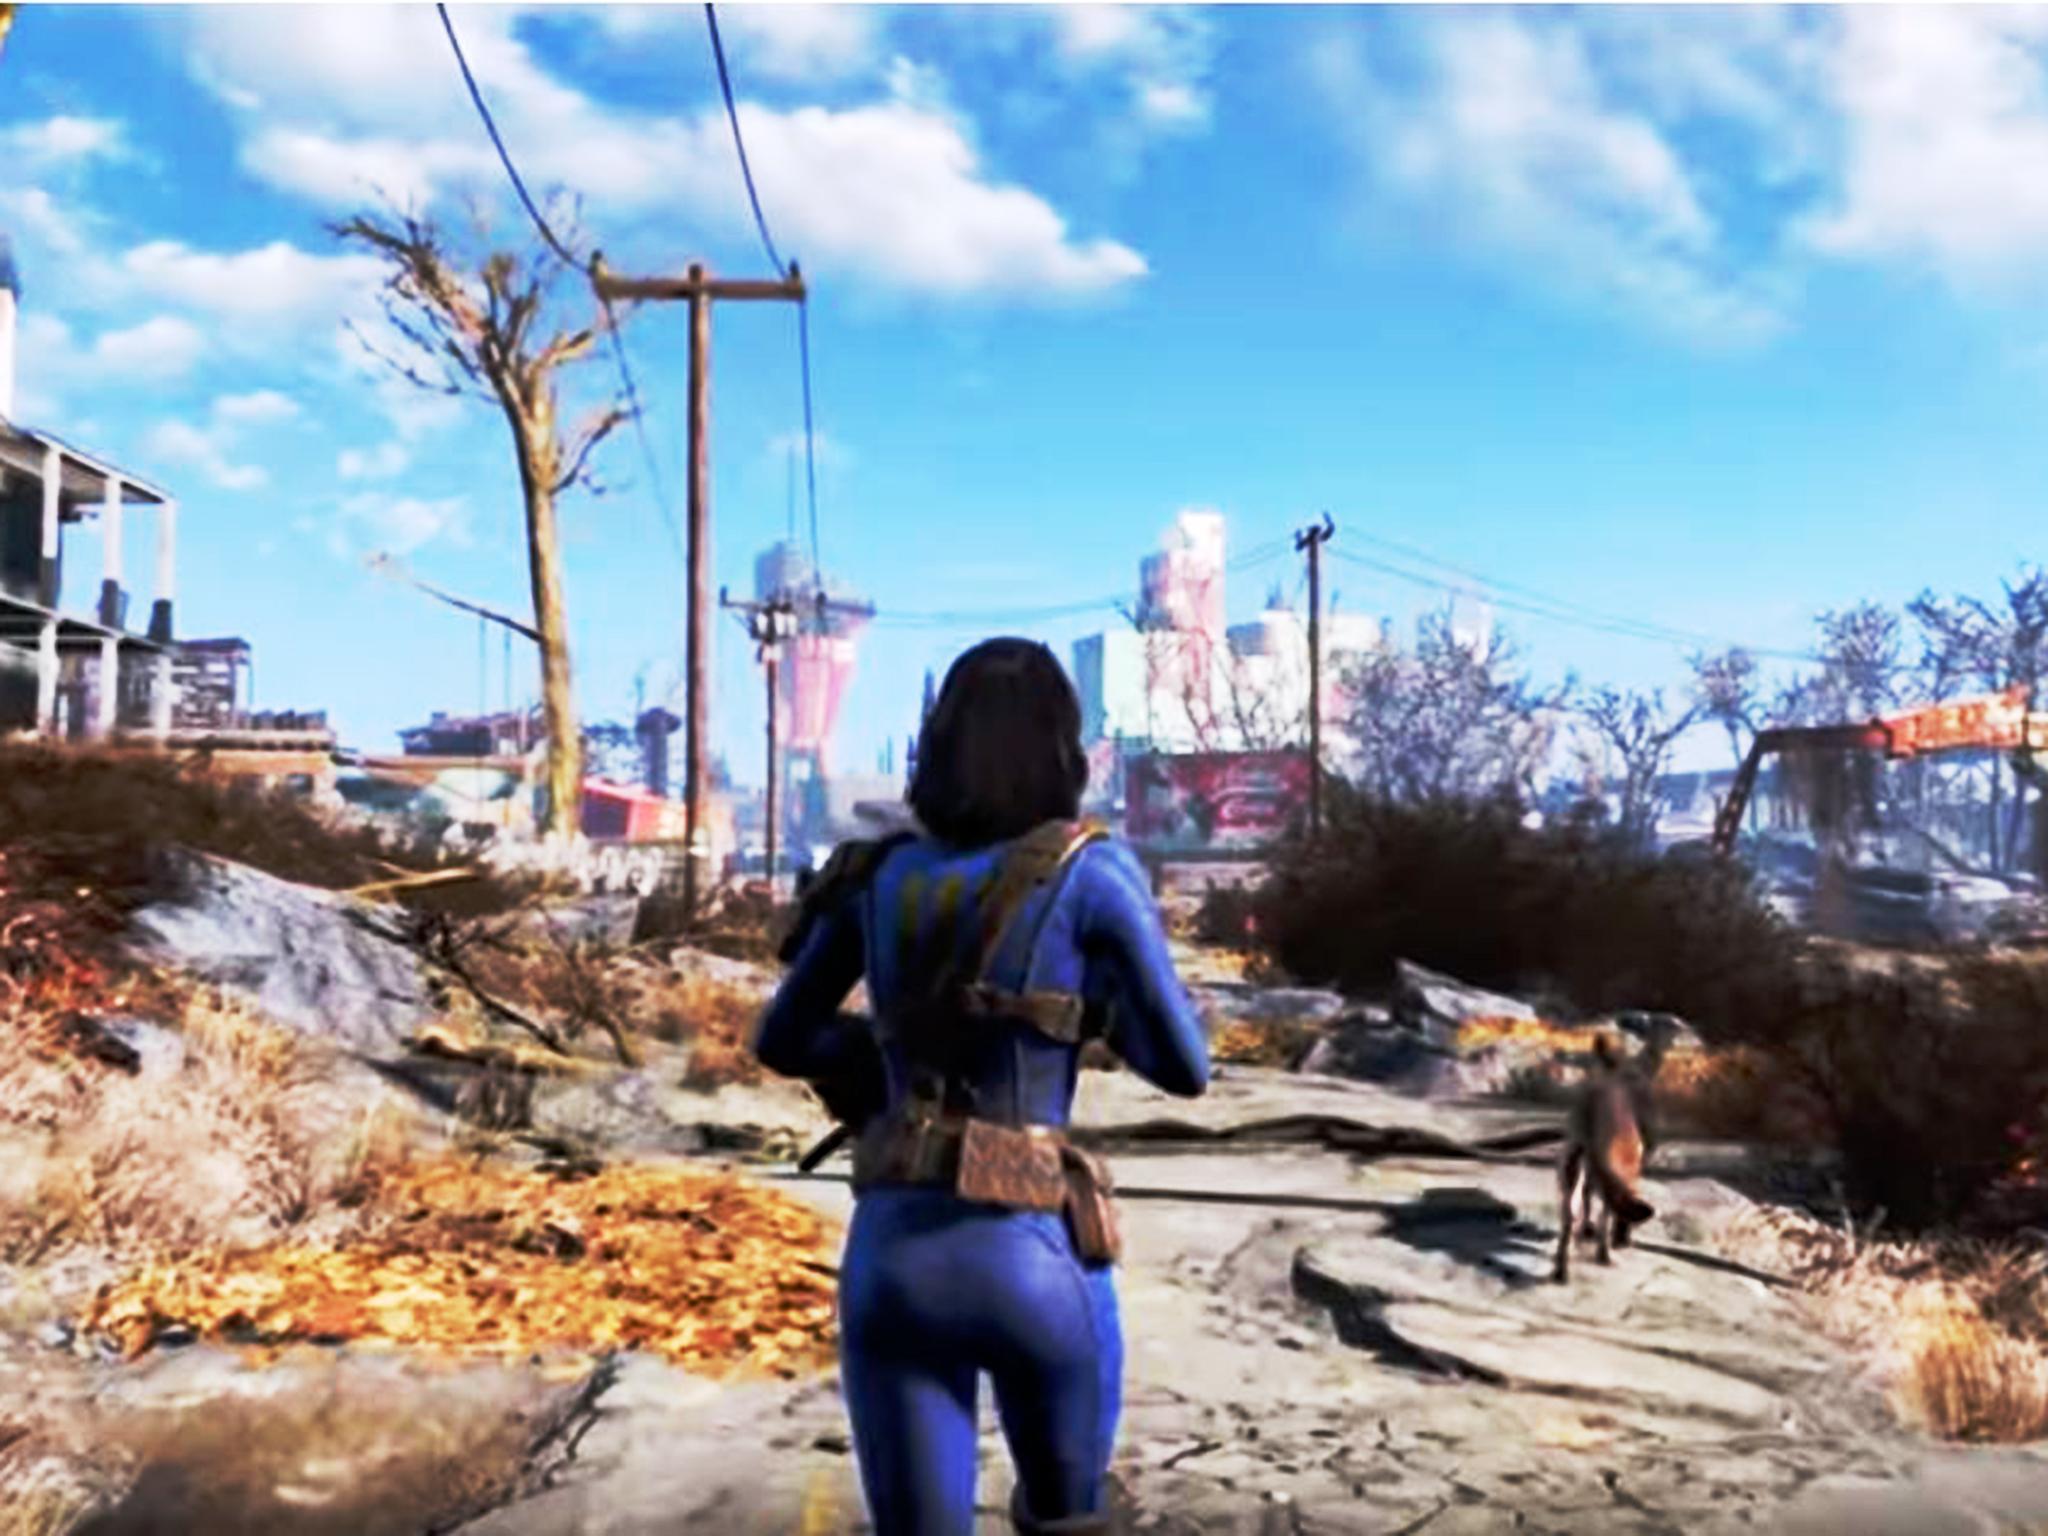 ‘Fallout 4’ gives you the choice between three factions, all of whom have their own shortcomings